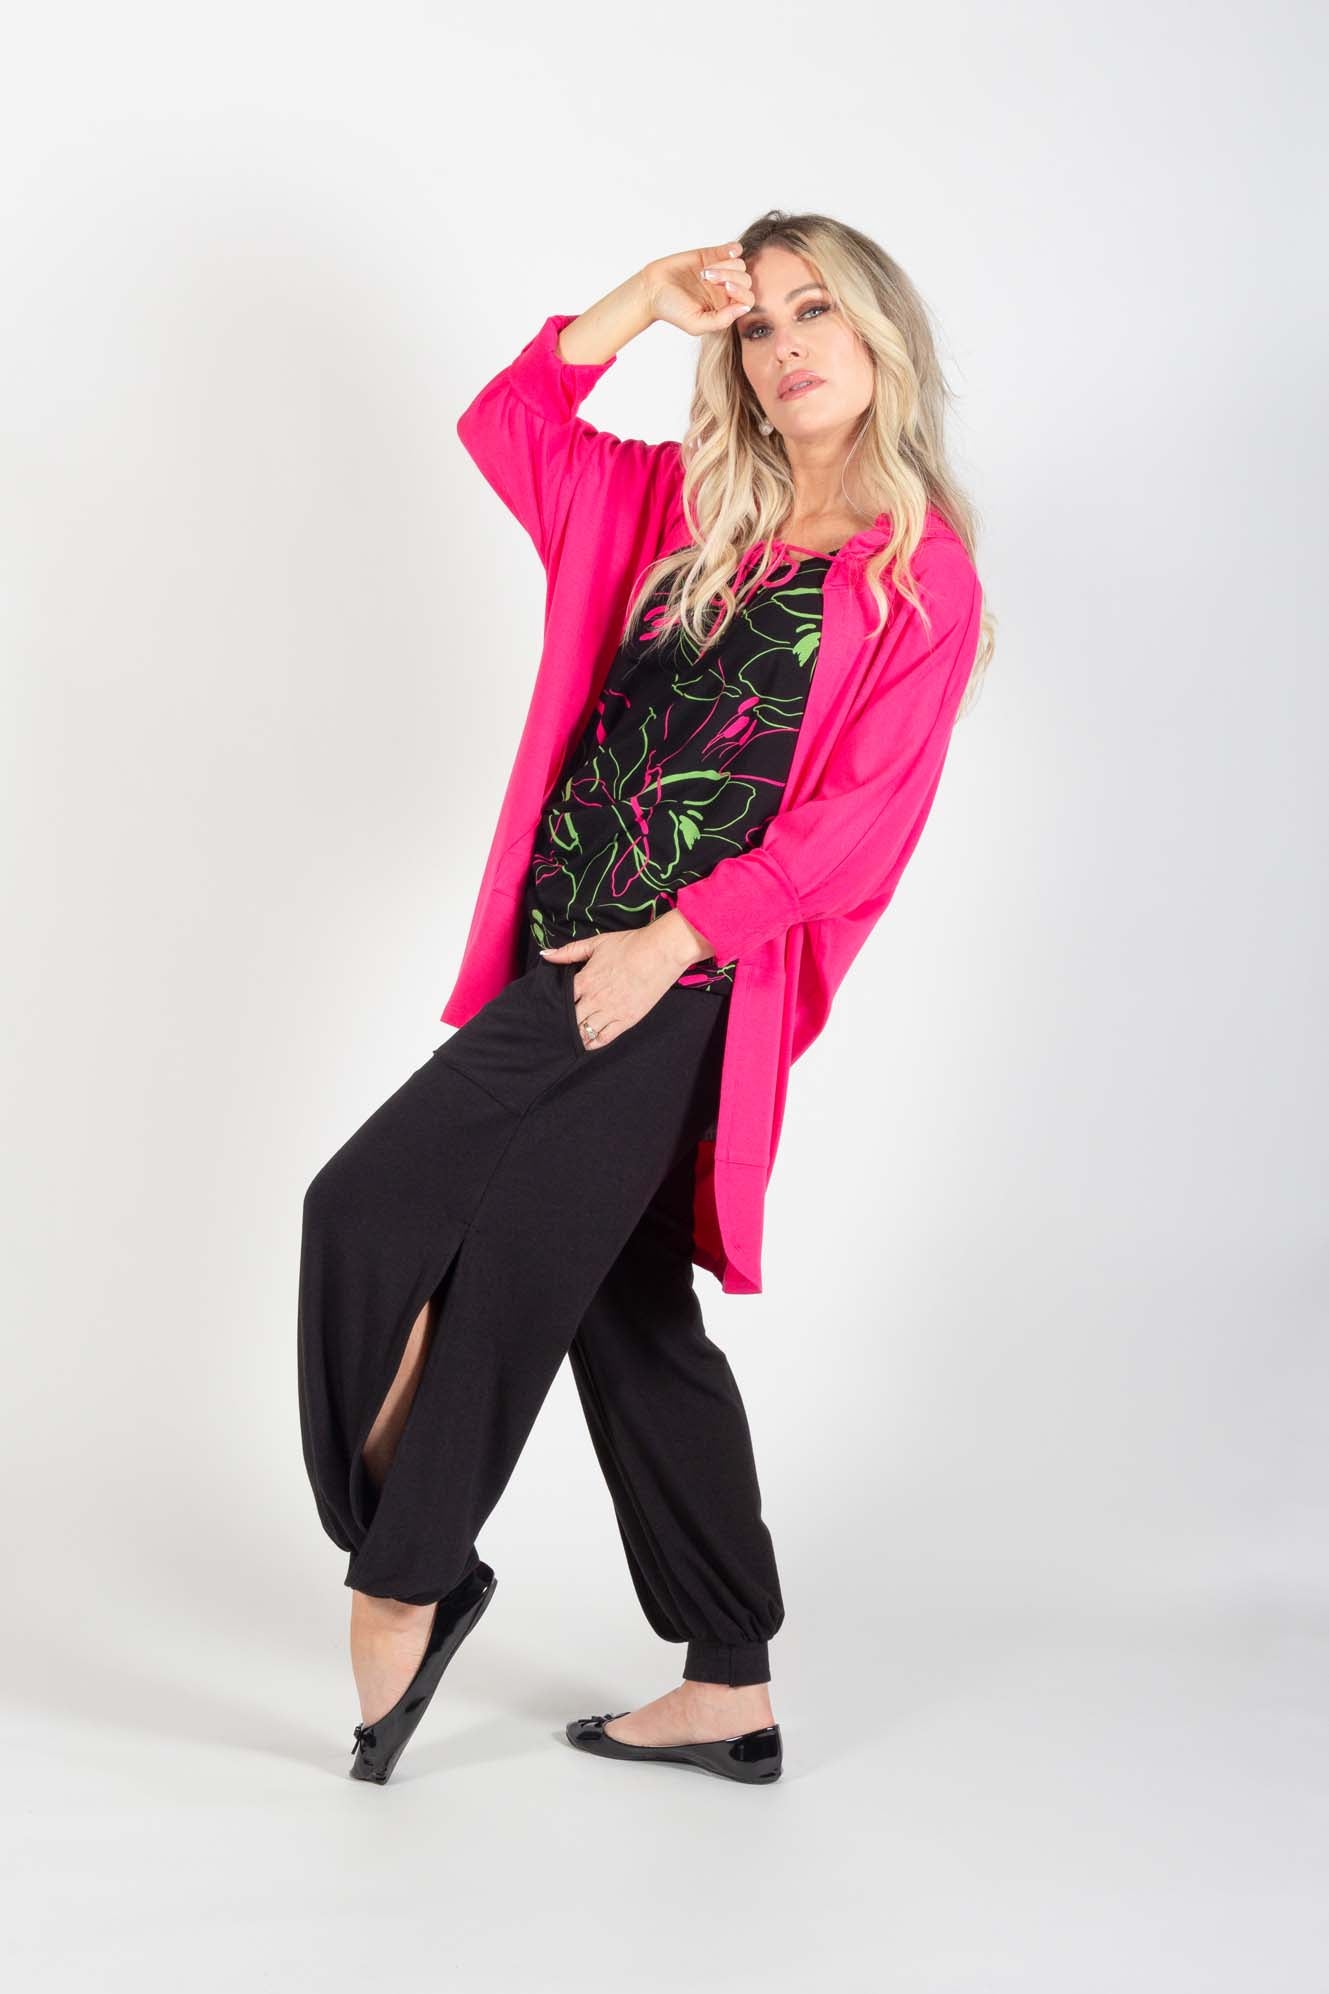 A side view of a woman wearing the Cooper Harem Pants by Pure Essence in Black with a hot pink top standing in front of a white background